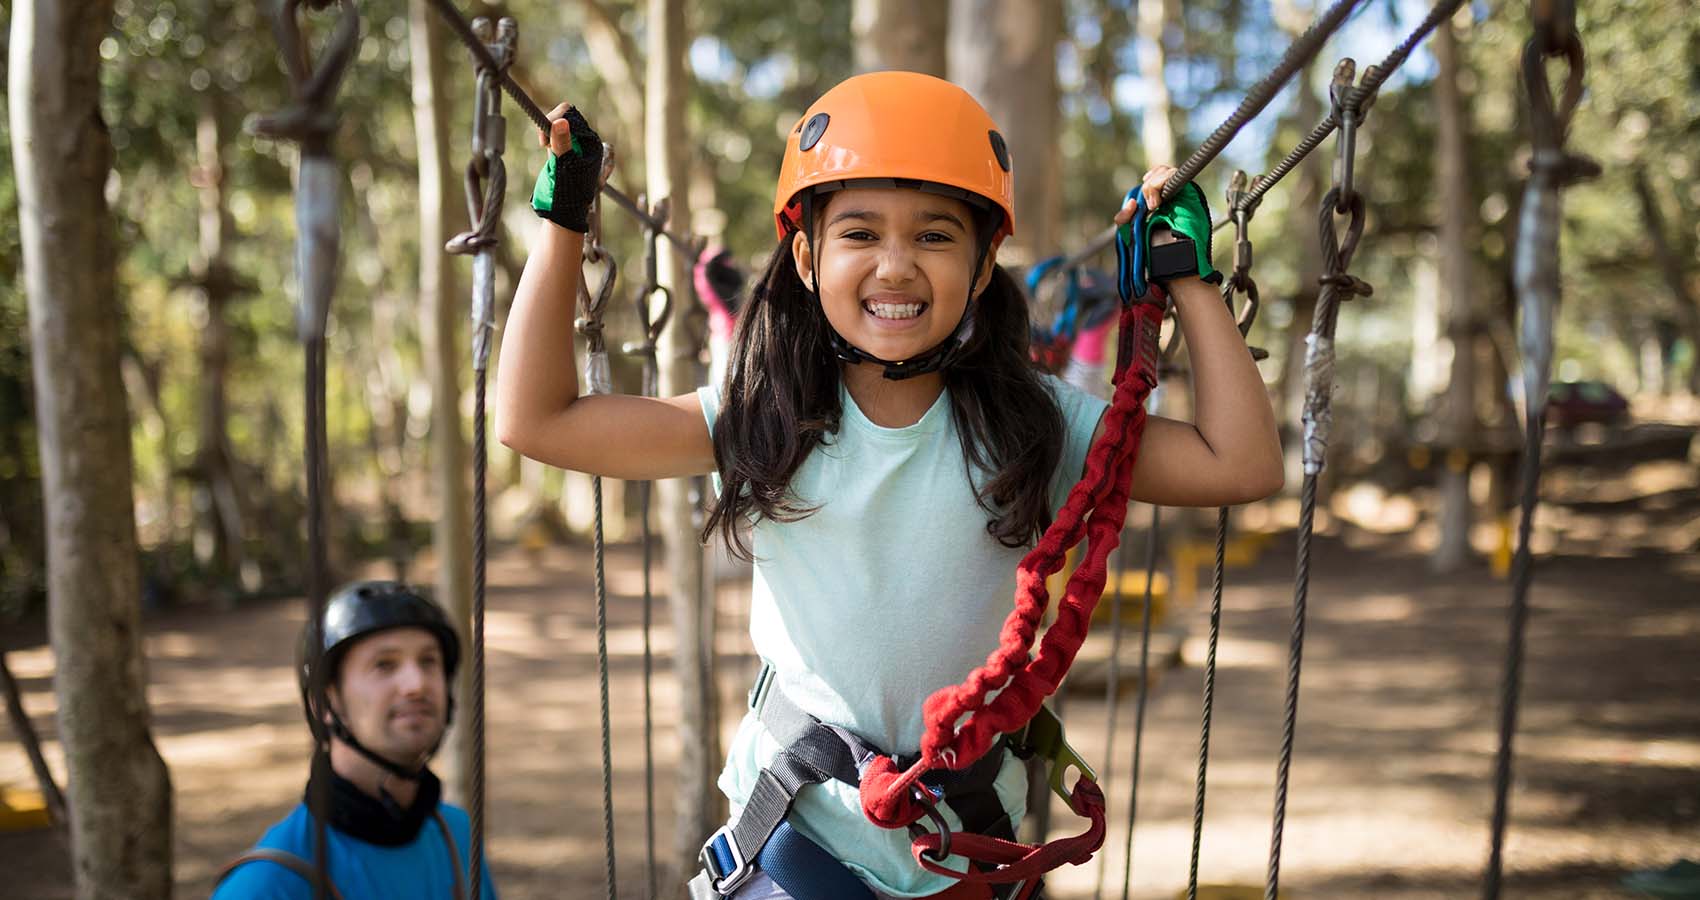 https://www.acacamps.org/sites/default/files/2022-11/stock-photo-girl-ropes-course.jpg